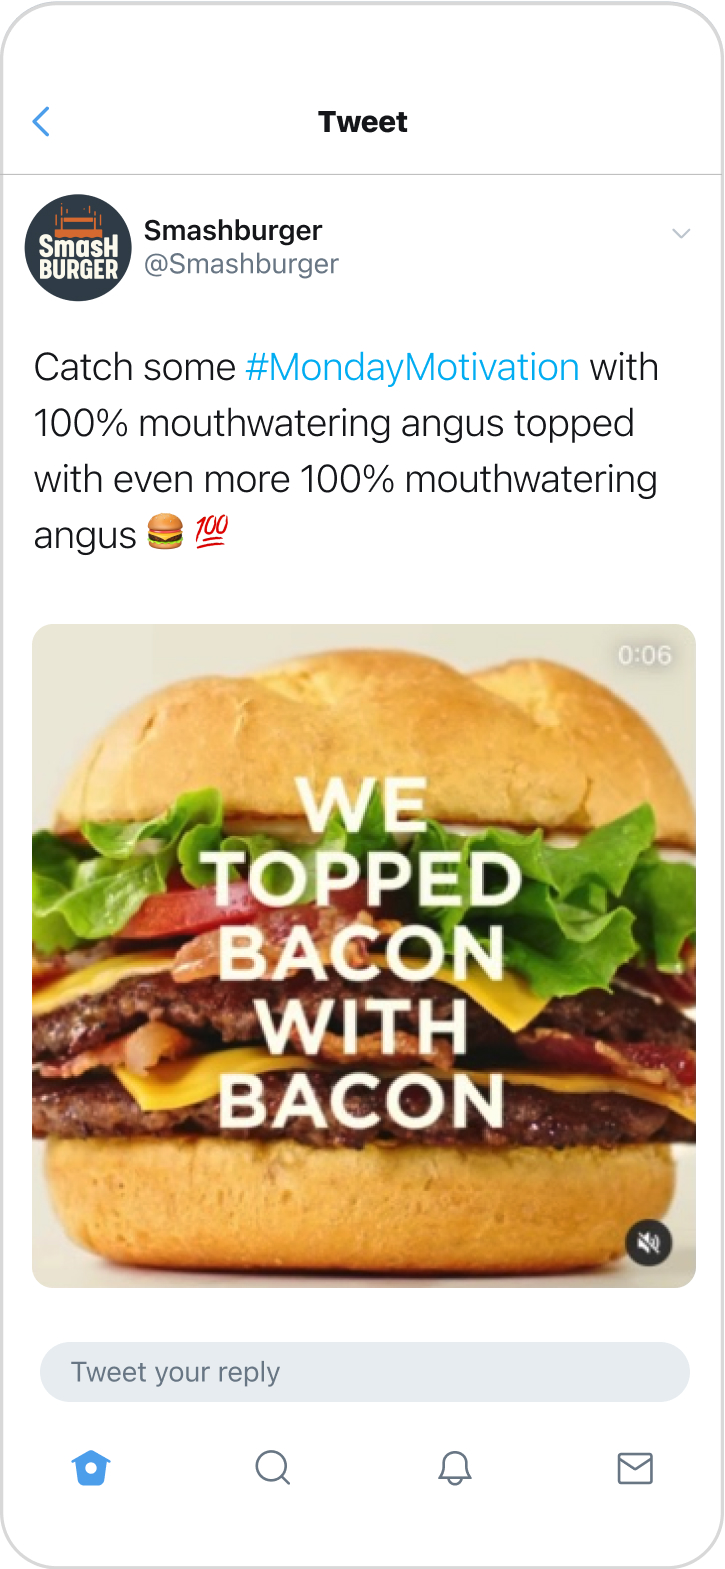 Smashburger tweet - "Catch some Monday Motivation with 100% mouthwatering angus topped with even more 100% mouthwatering angus."